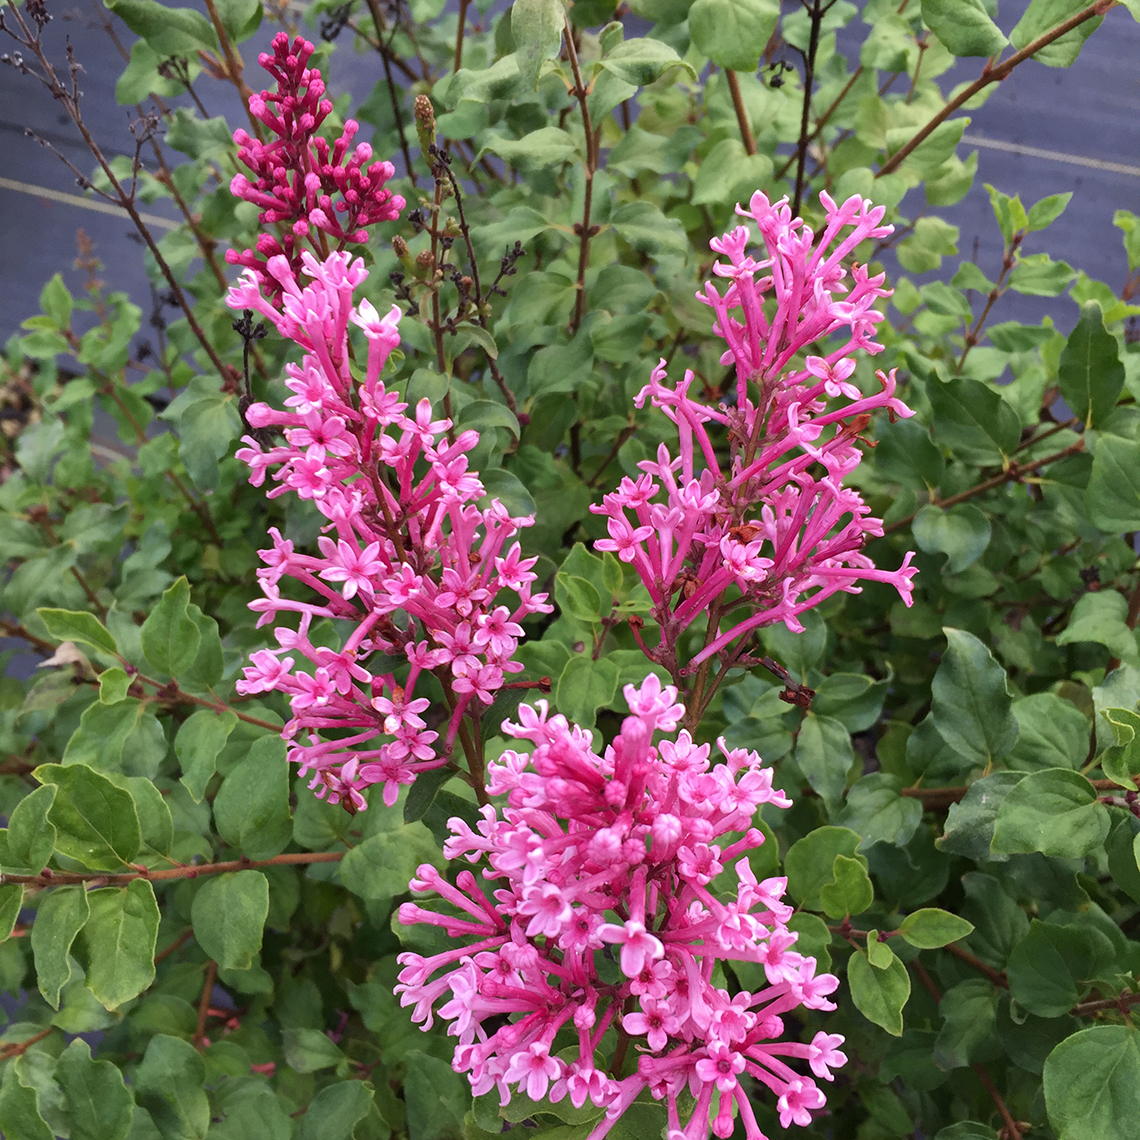 The flowers of Bloomerang Dwarf Pink reblooming lilac up close